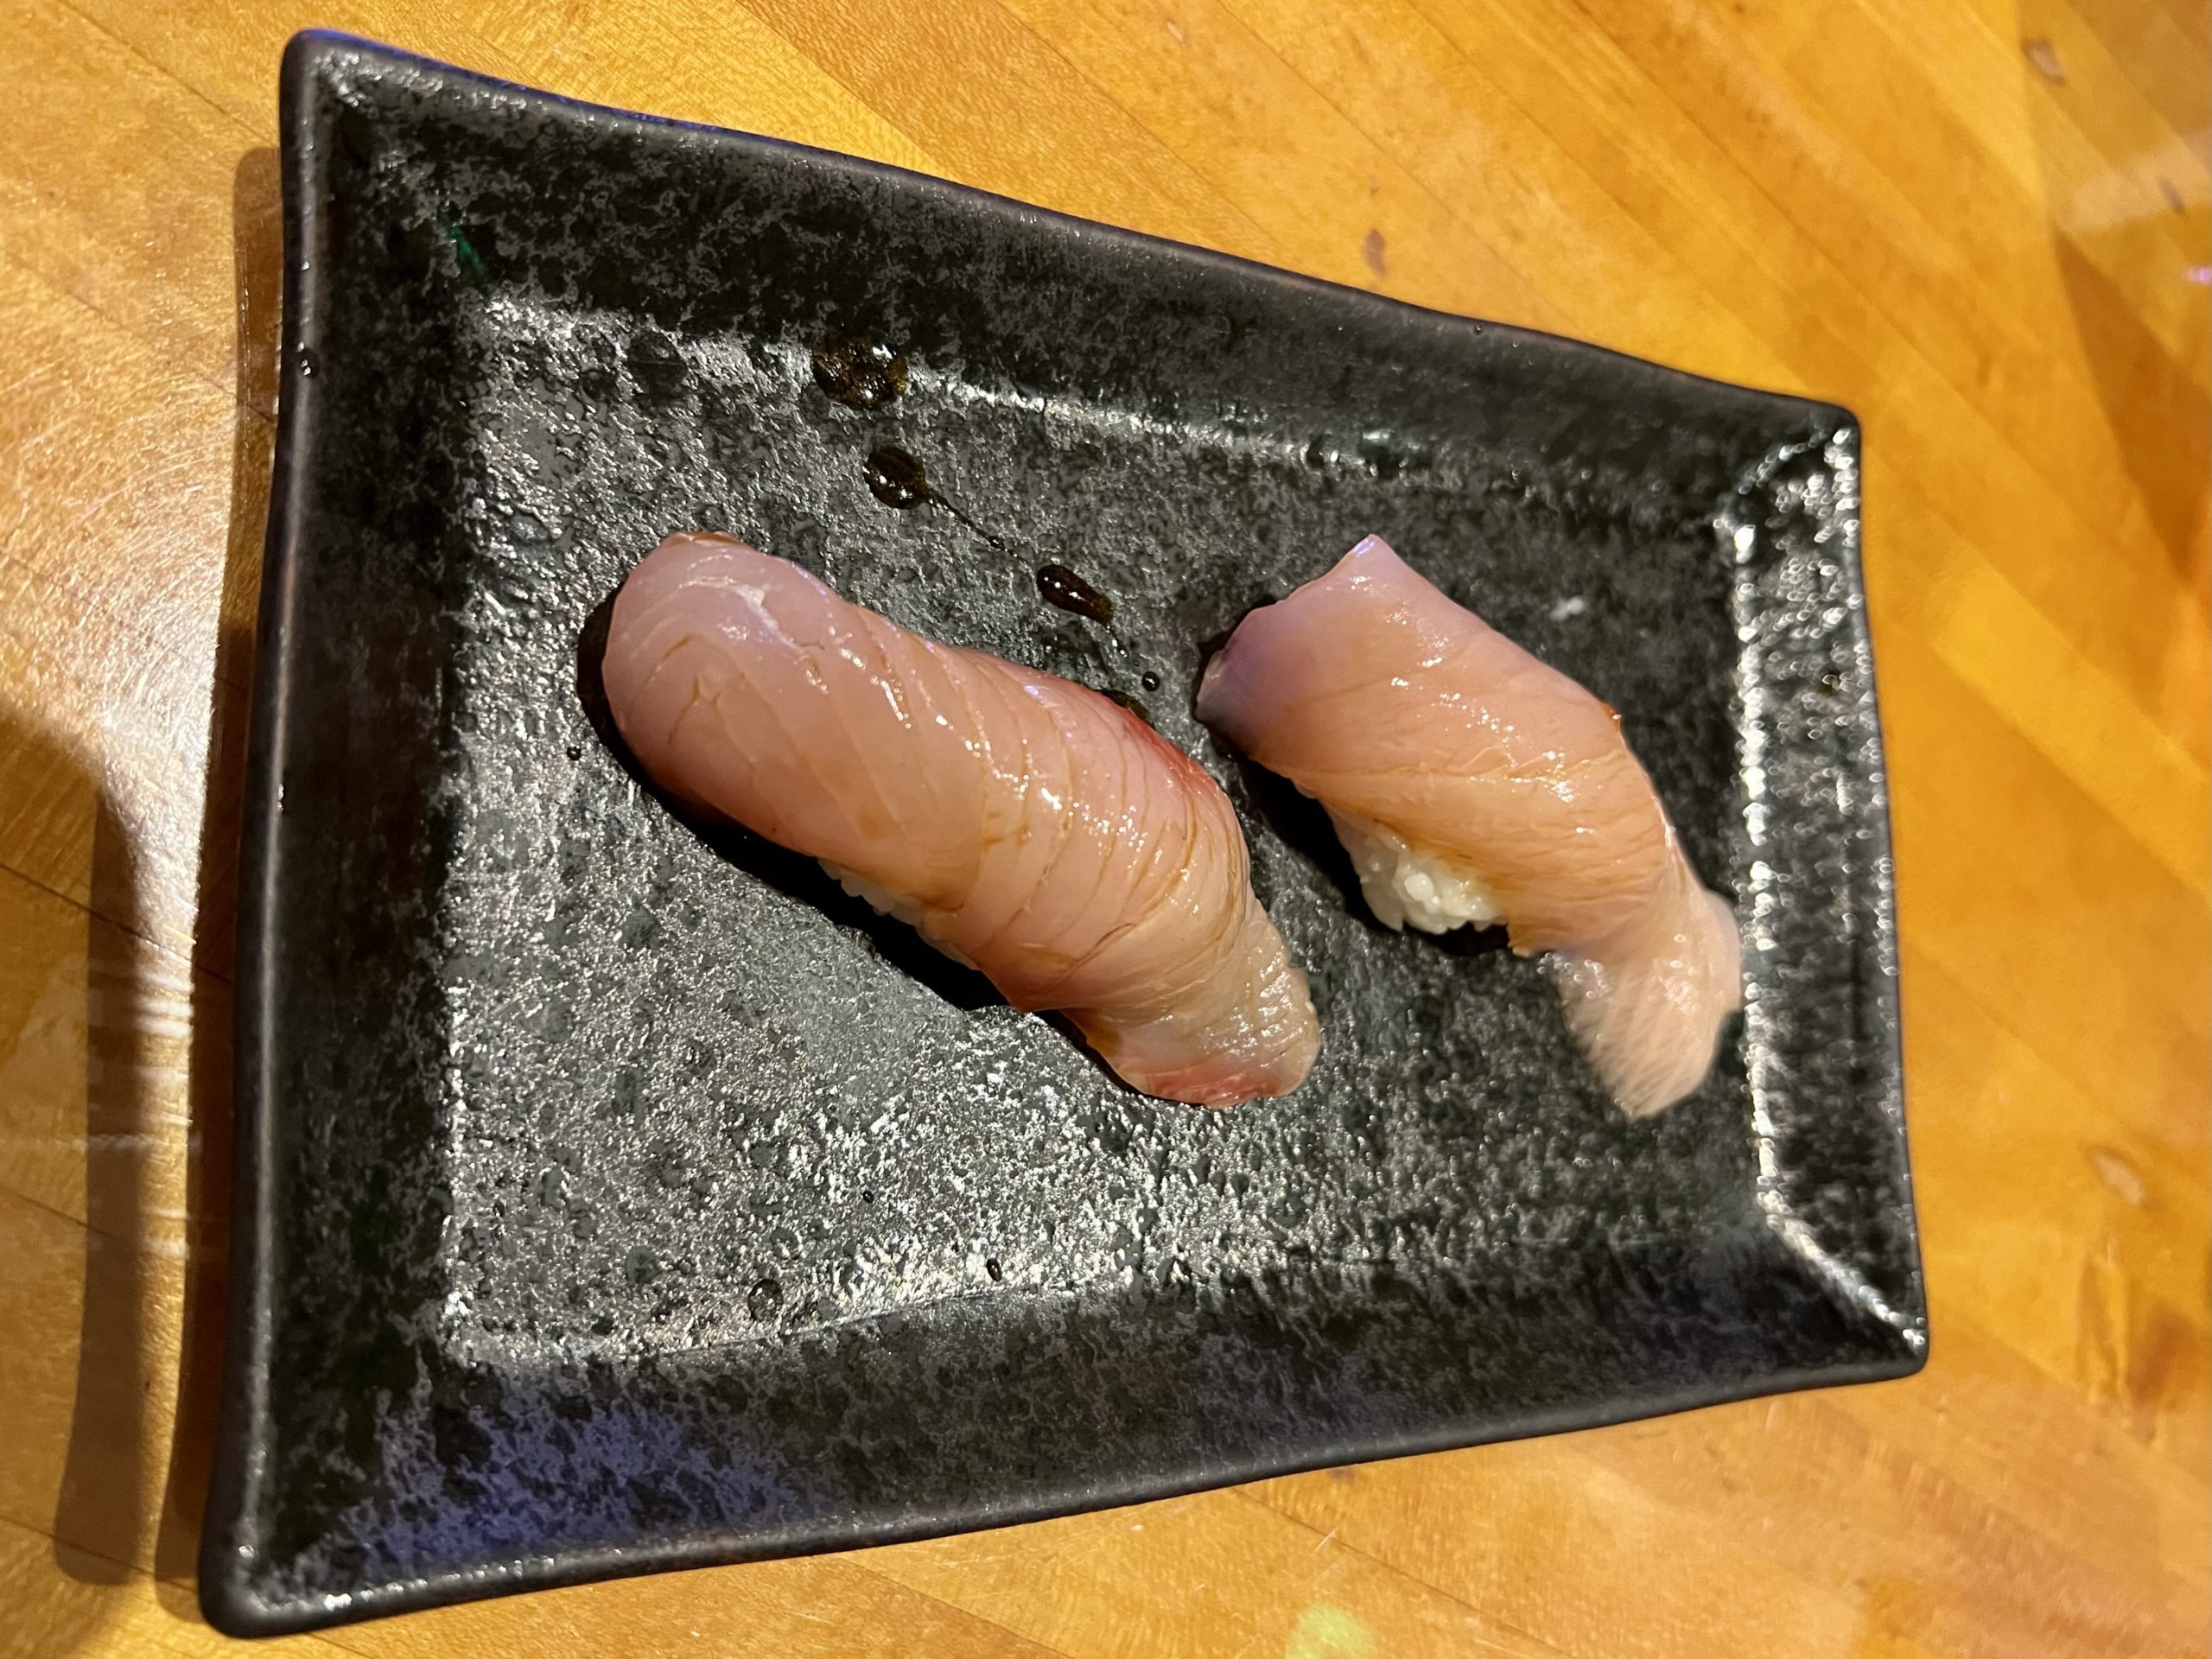 a plate of raw fish on a wood surface